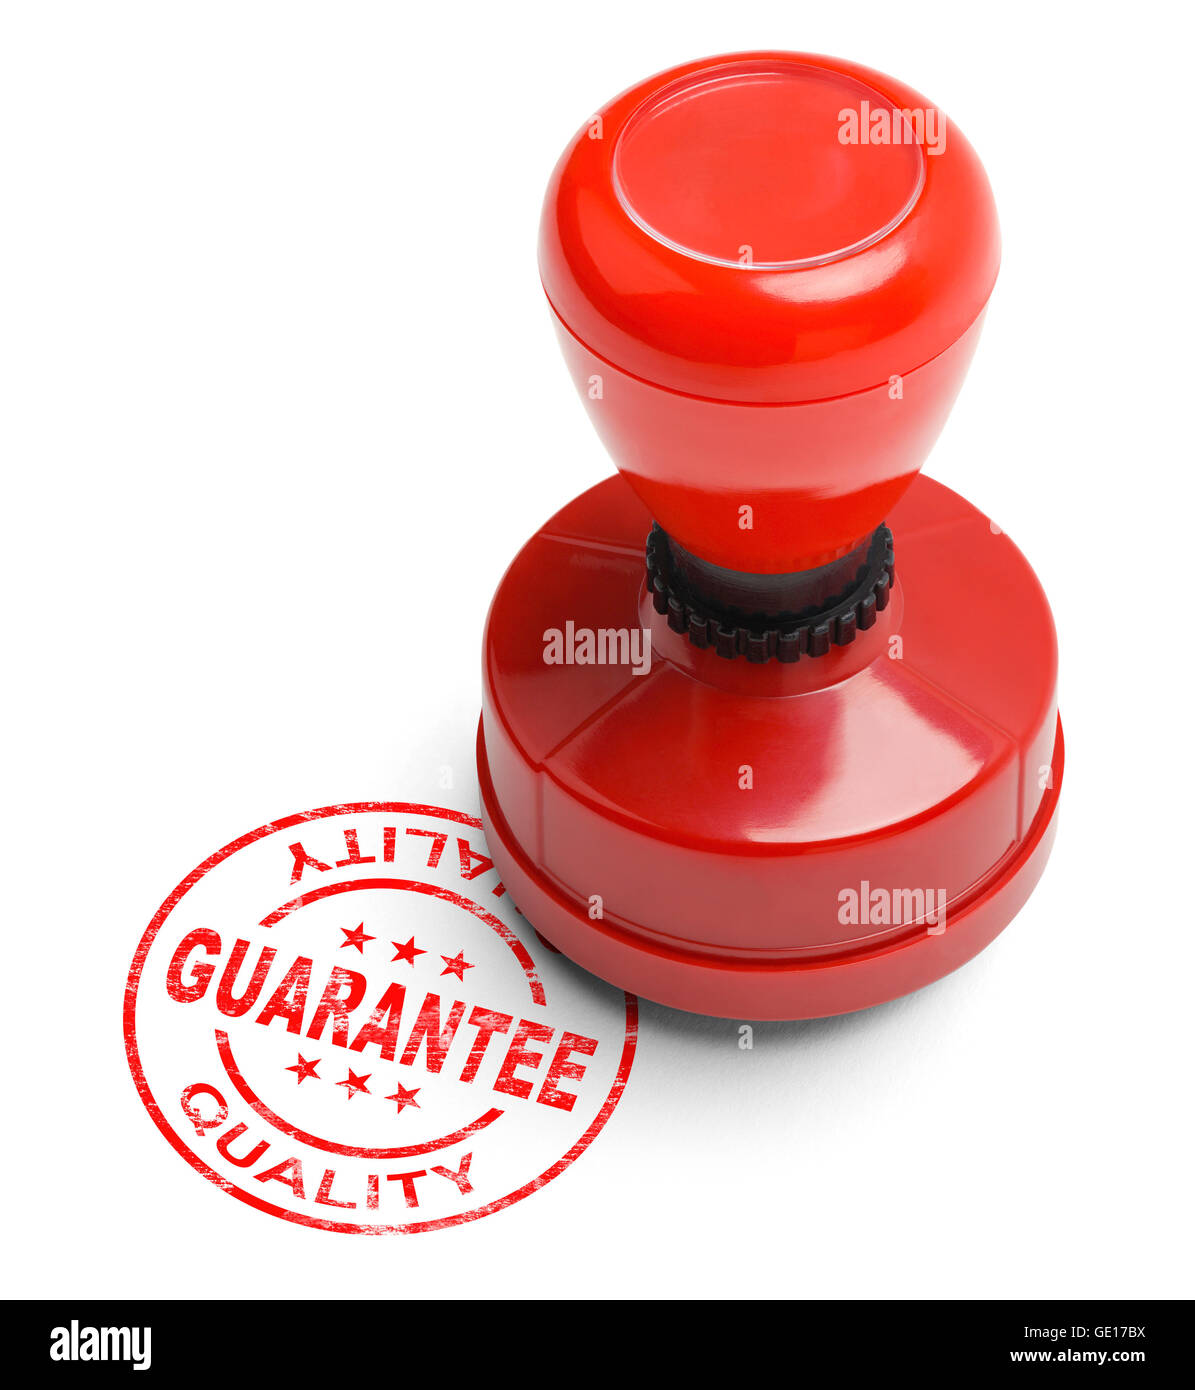 Red Quality Guarantee Stamper Isolated on White Background. Stock Photo